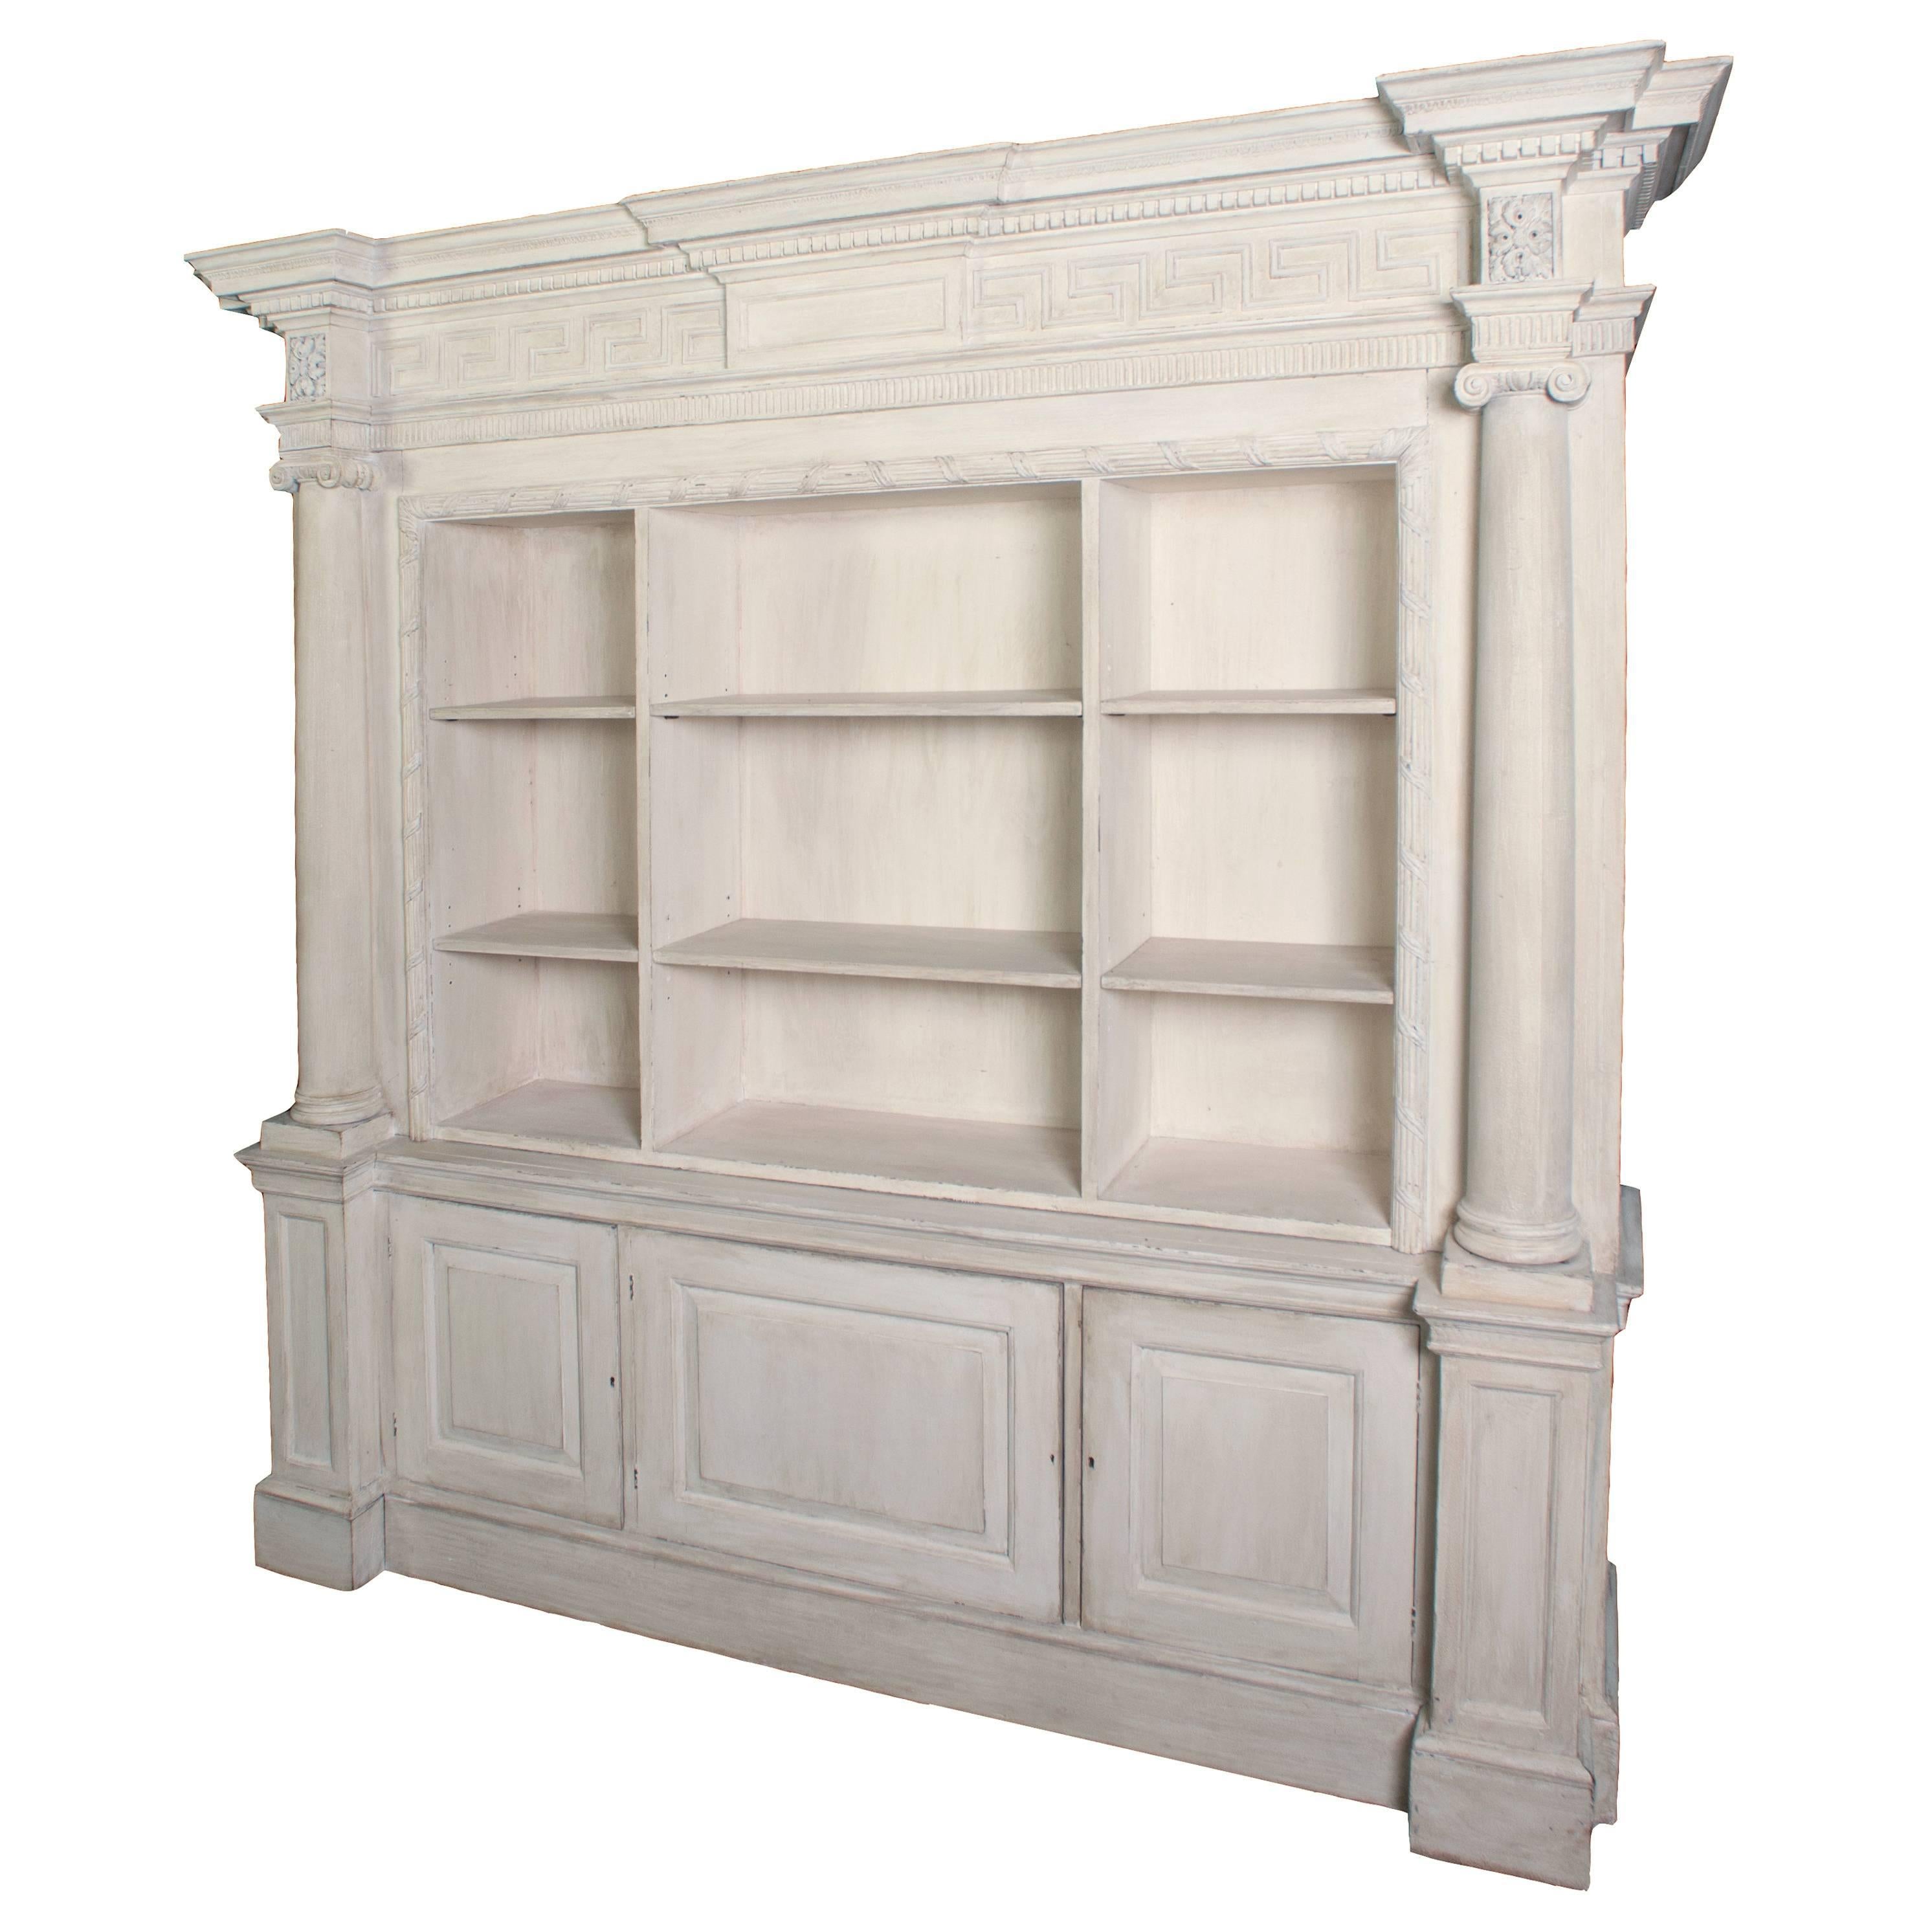 A cream painted wooden neoclassical bookcase in two sections